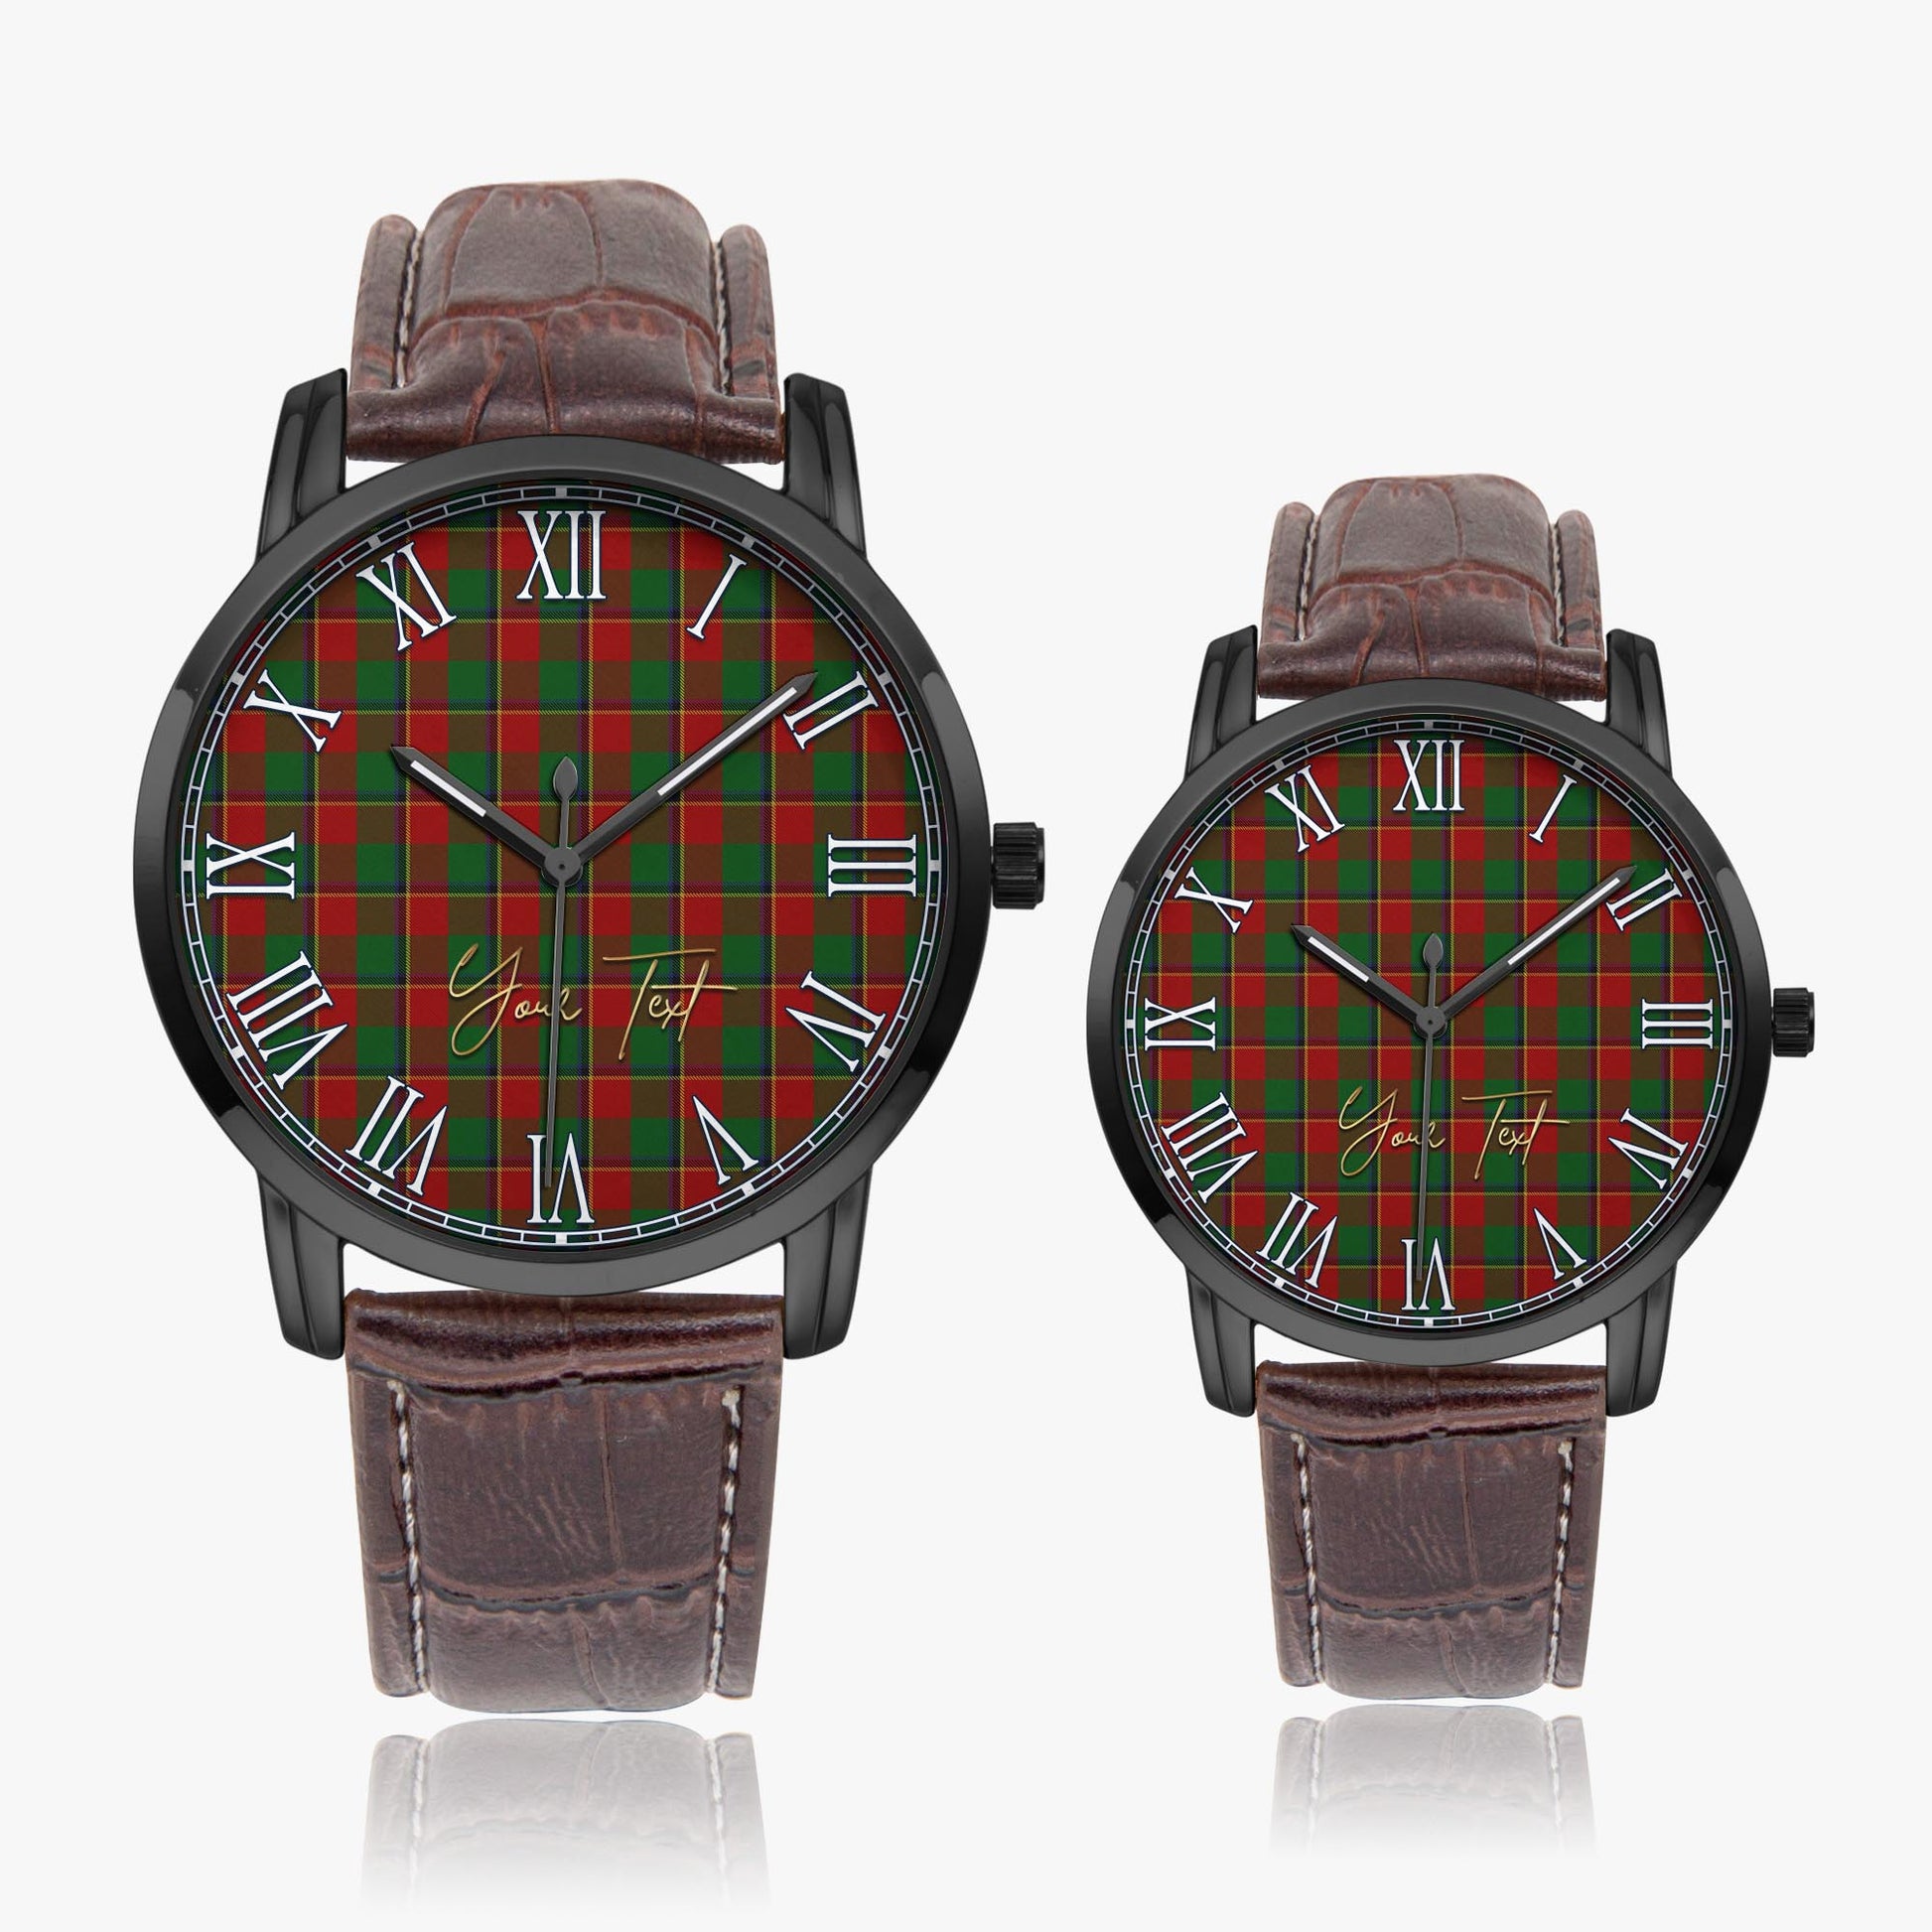 Turnbull Dress Tartan Personalized Your Text Leather Trap Quartz Watch Wide Type Black Case With Brown Leather Strap - Tartanvibesclothing Shop